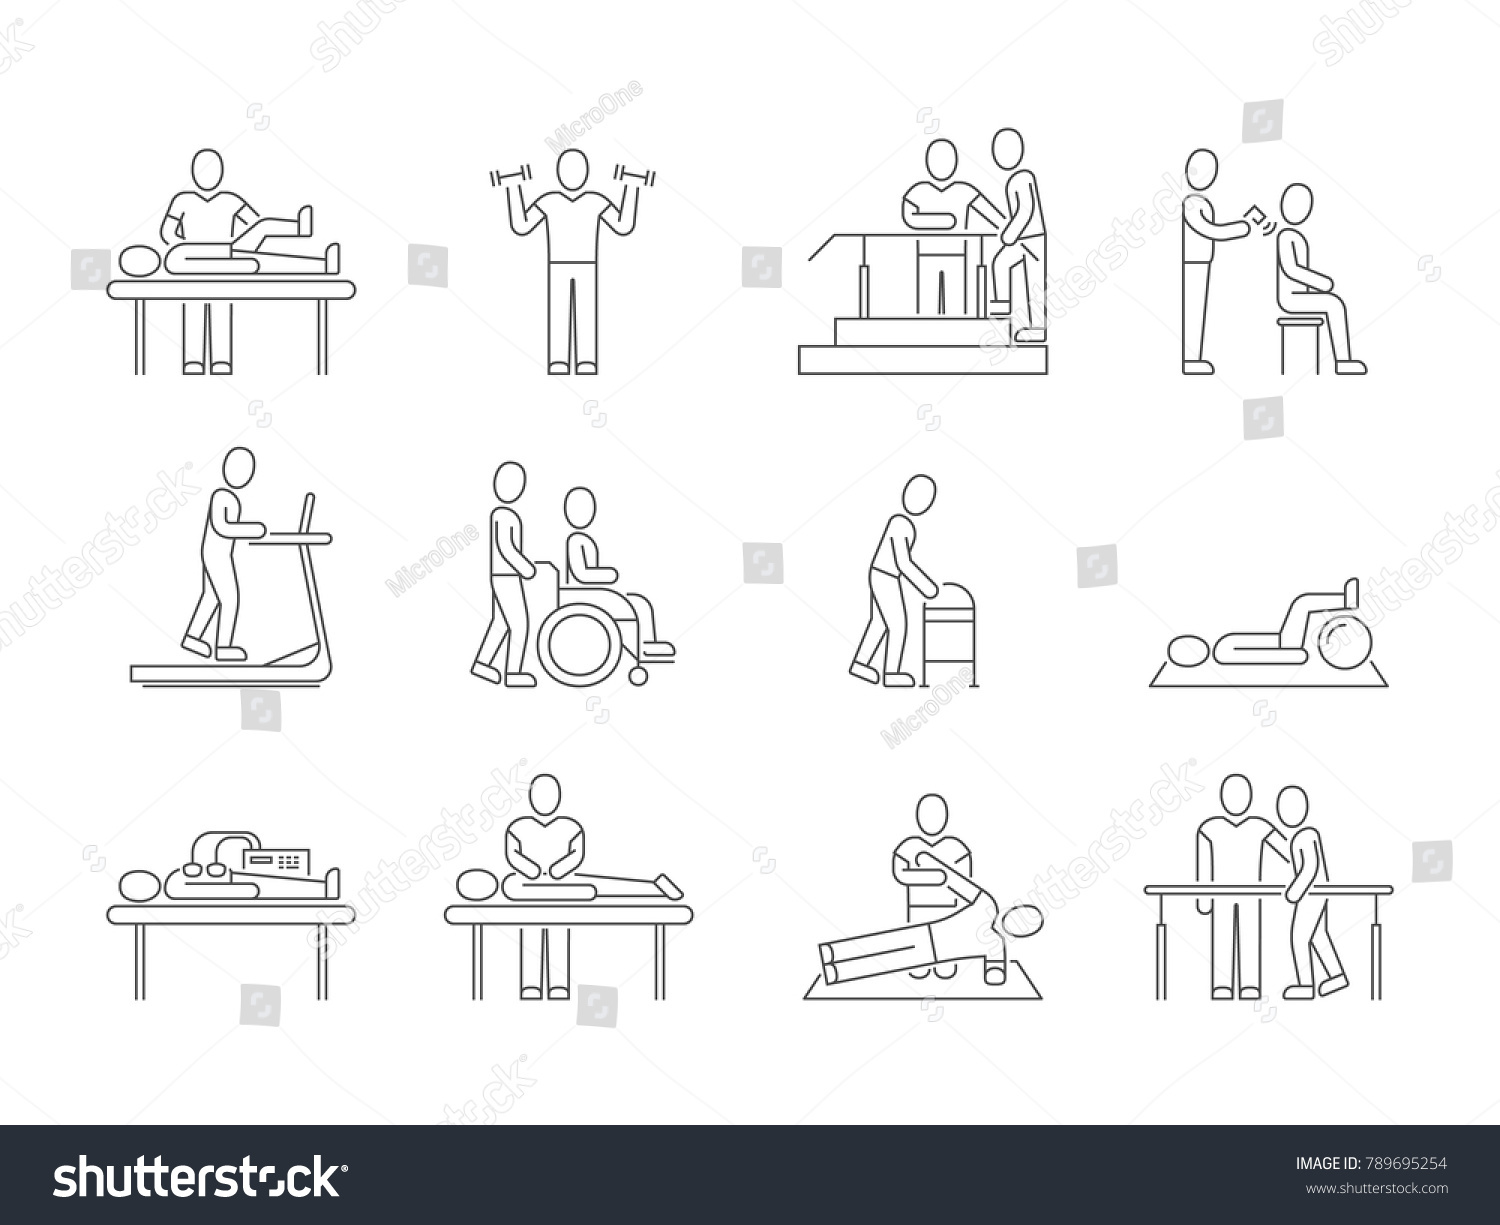 SVG of Physiotherapy and rehabilitation, exercises and massage therapy vector line medical icons. Medical patient, physical therapy exercise illustration svg